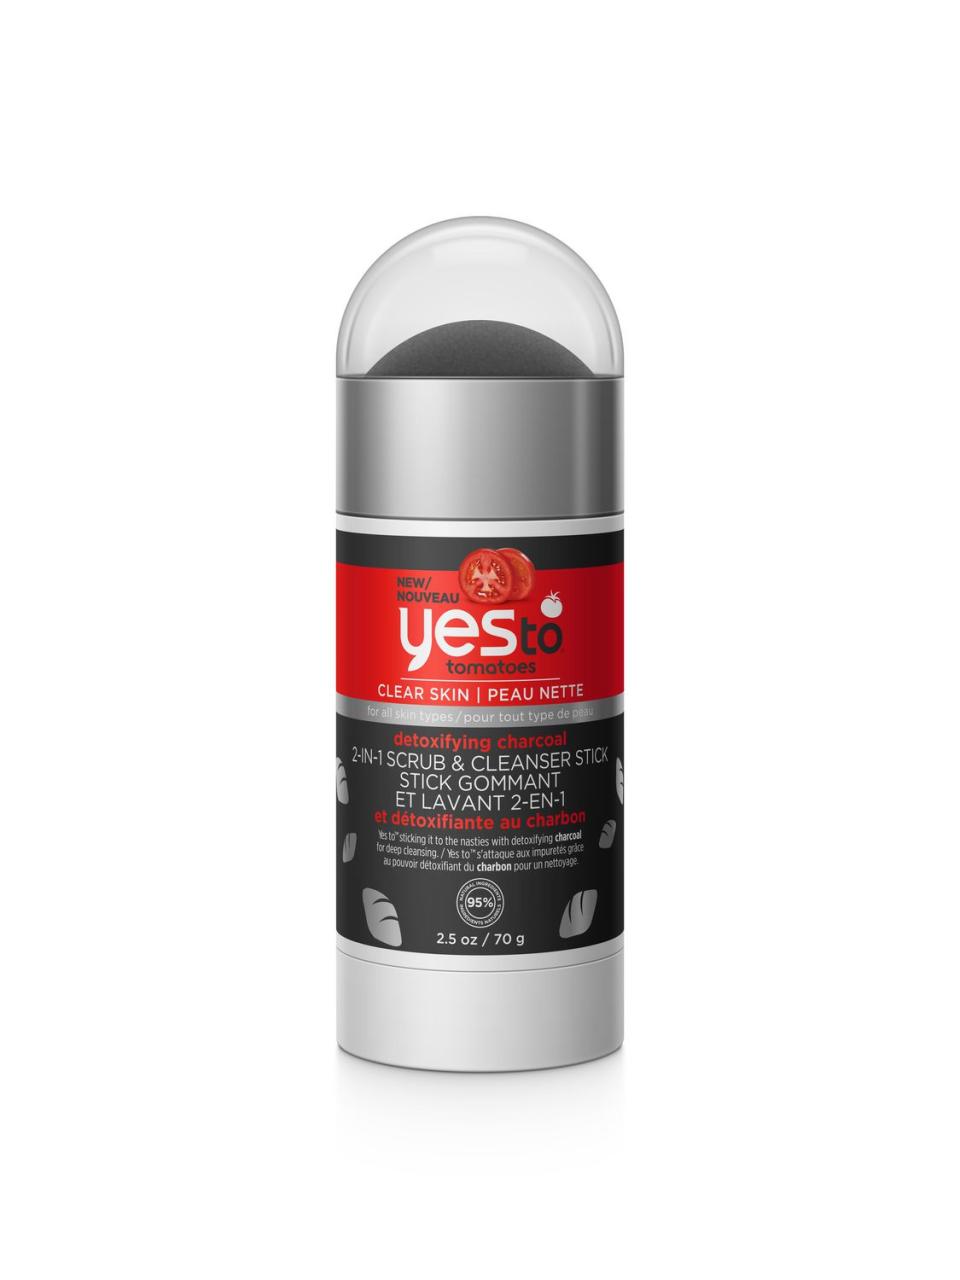 Yes to Charcoal 2-in-1 Scrub & Cleanser Stick